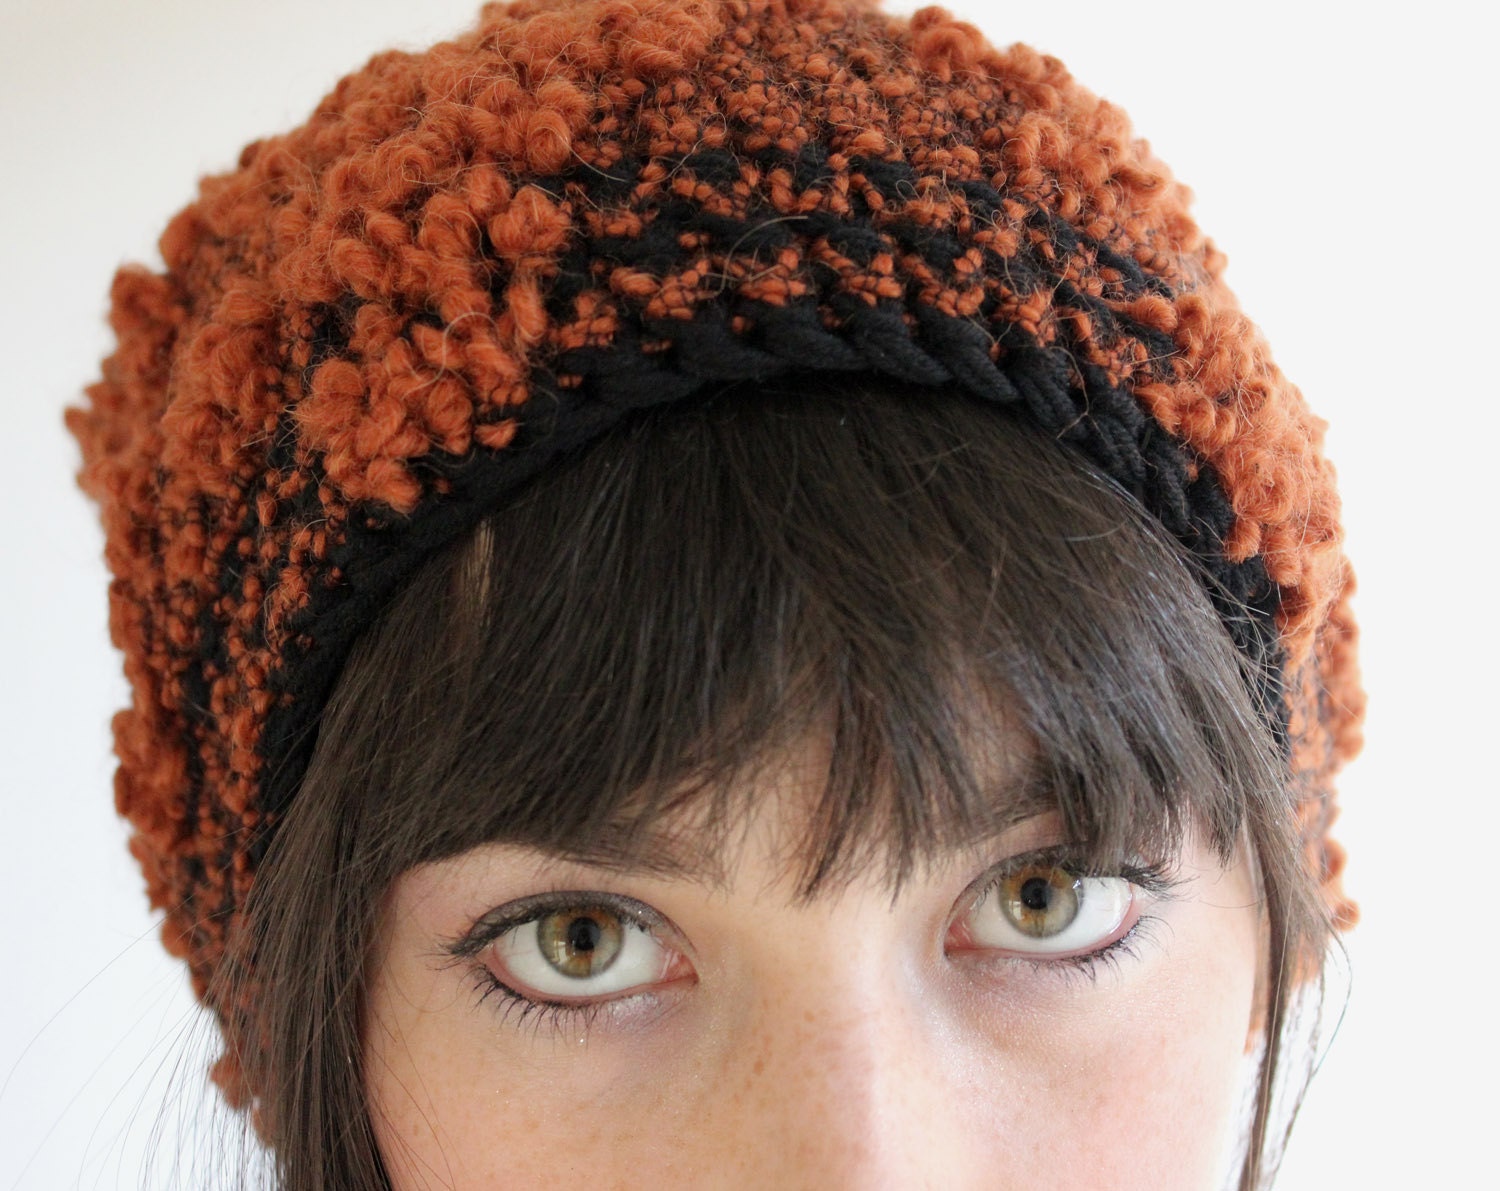 Slouchy Hat in  Rusty Orange and Black with Texture Crochet Handmade - twoknit